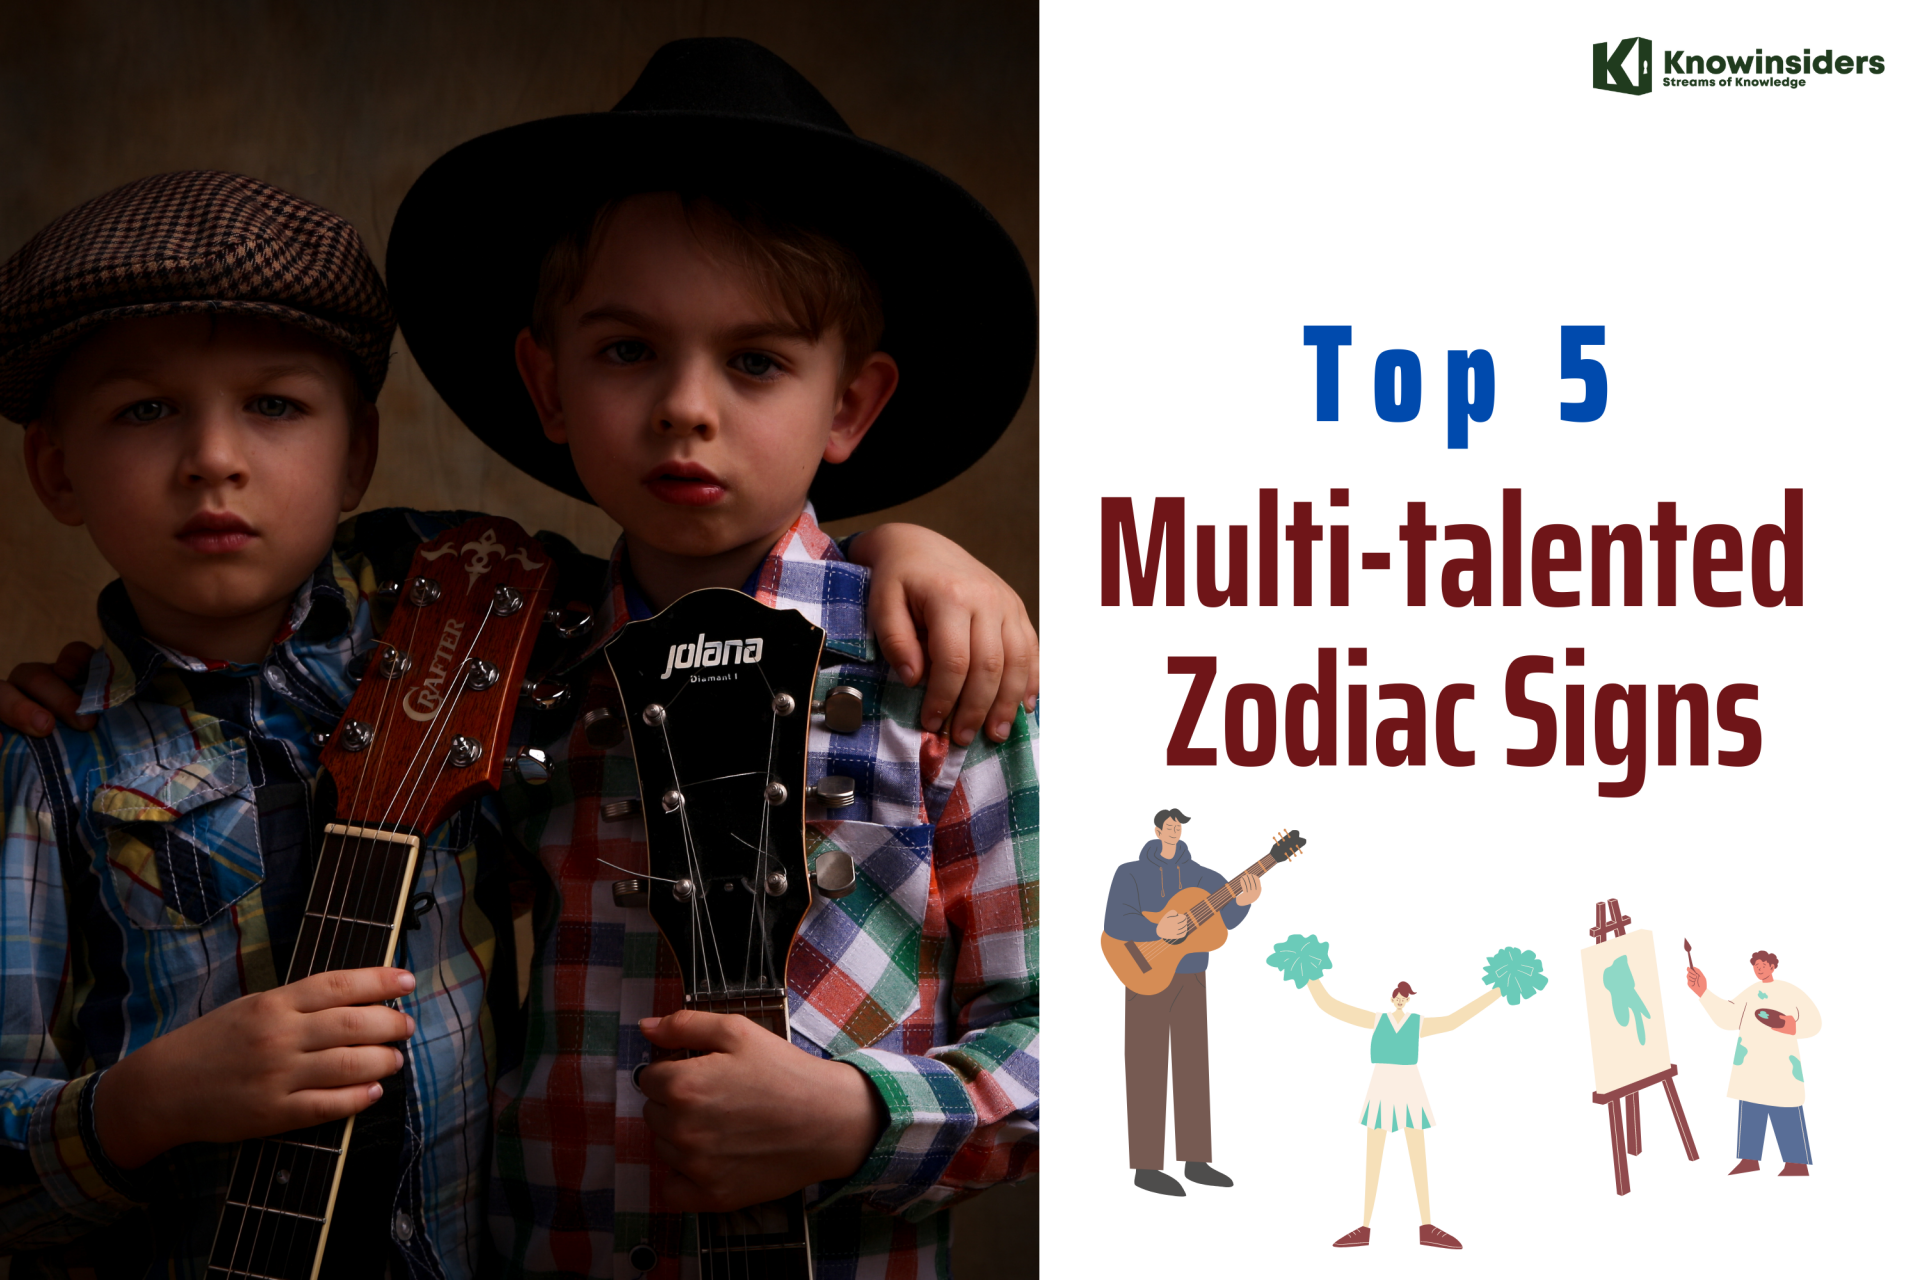 Top 5 Zodiac Signs Who Are Multi-Talented - According to Astrology